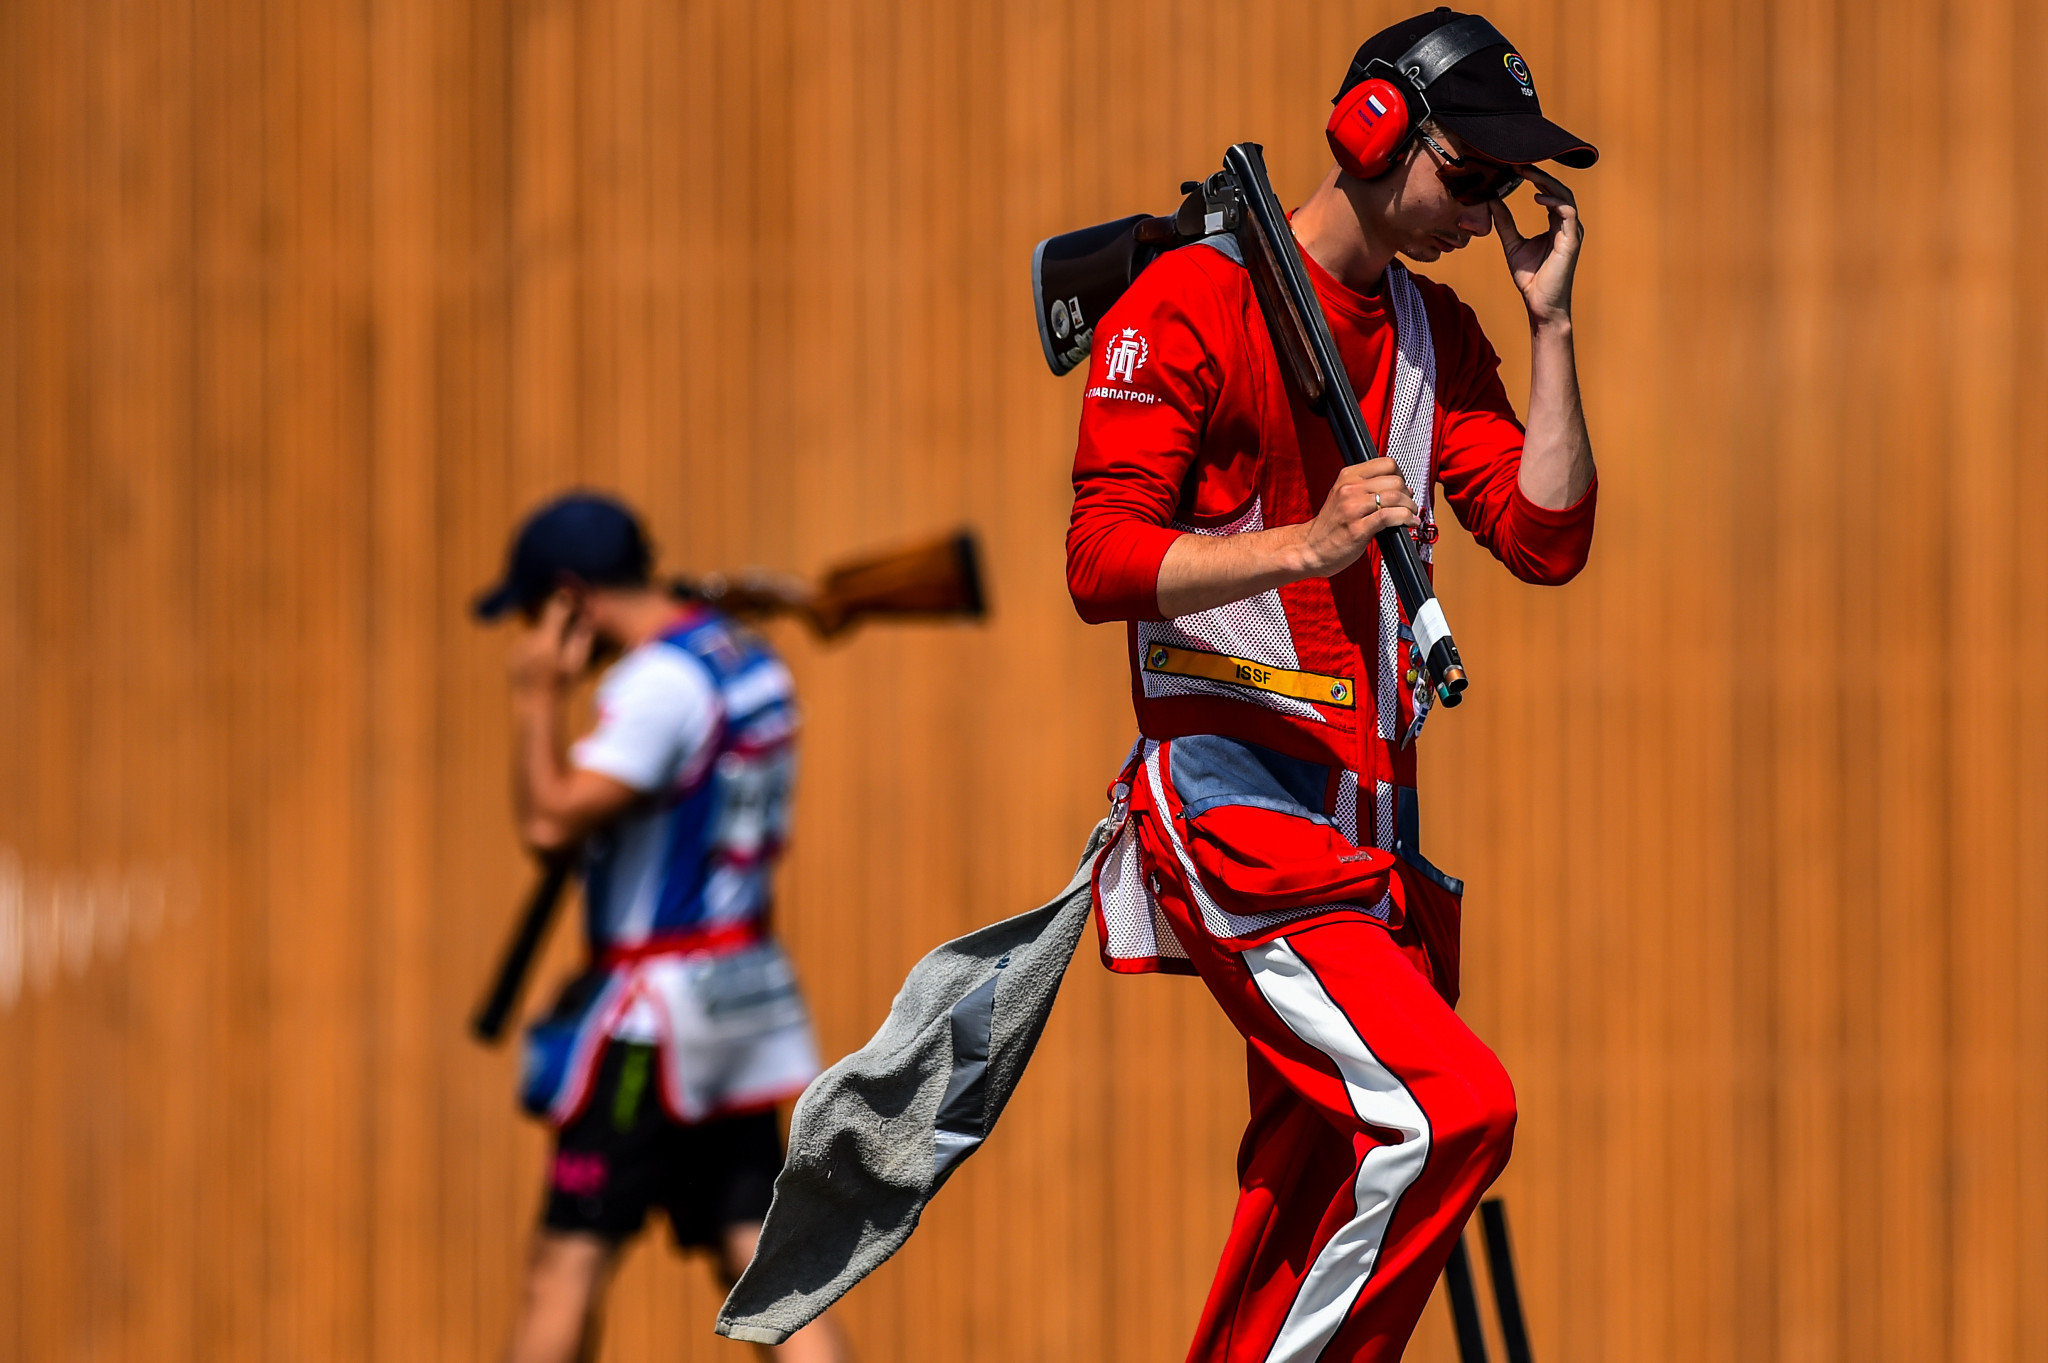 Russian shooters earn another gold at Cairo World Cup in mixed team discipline